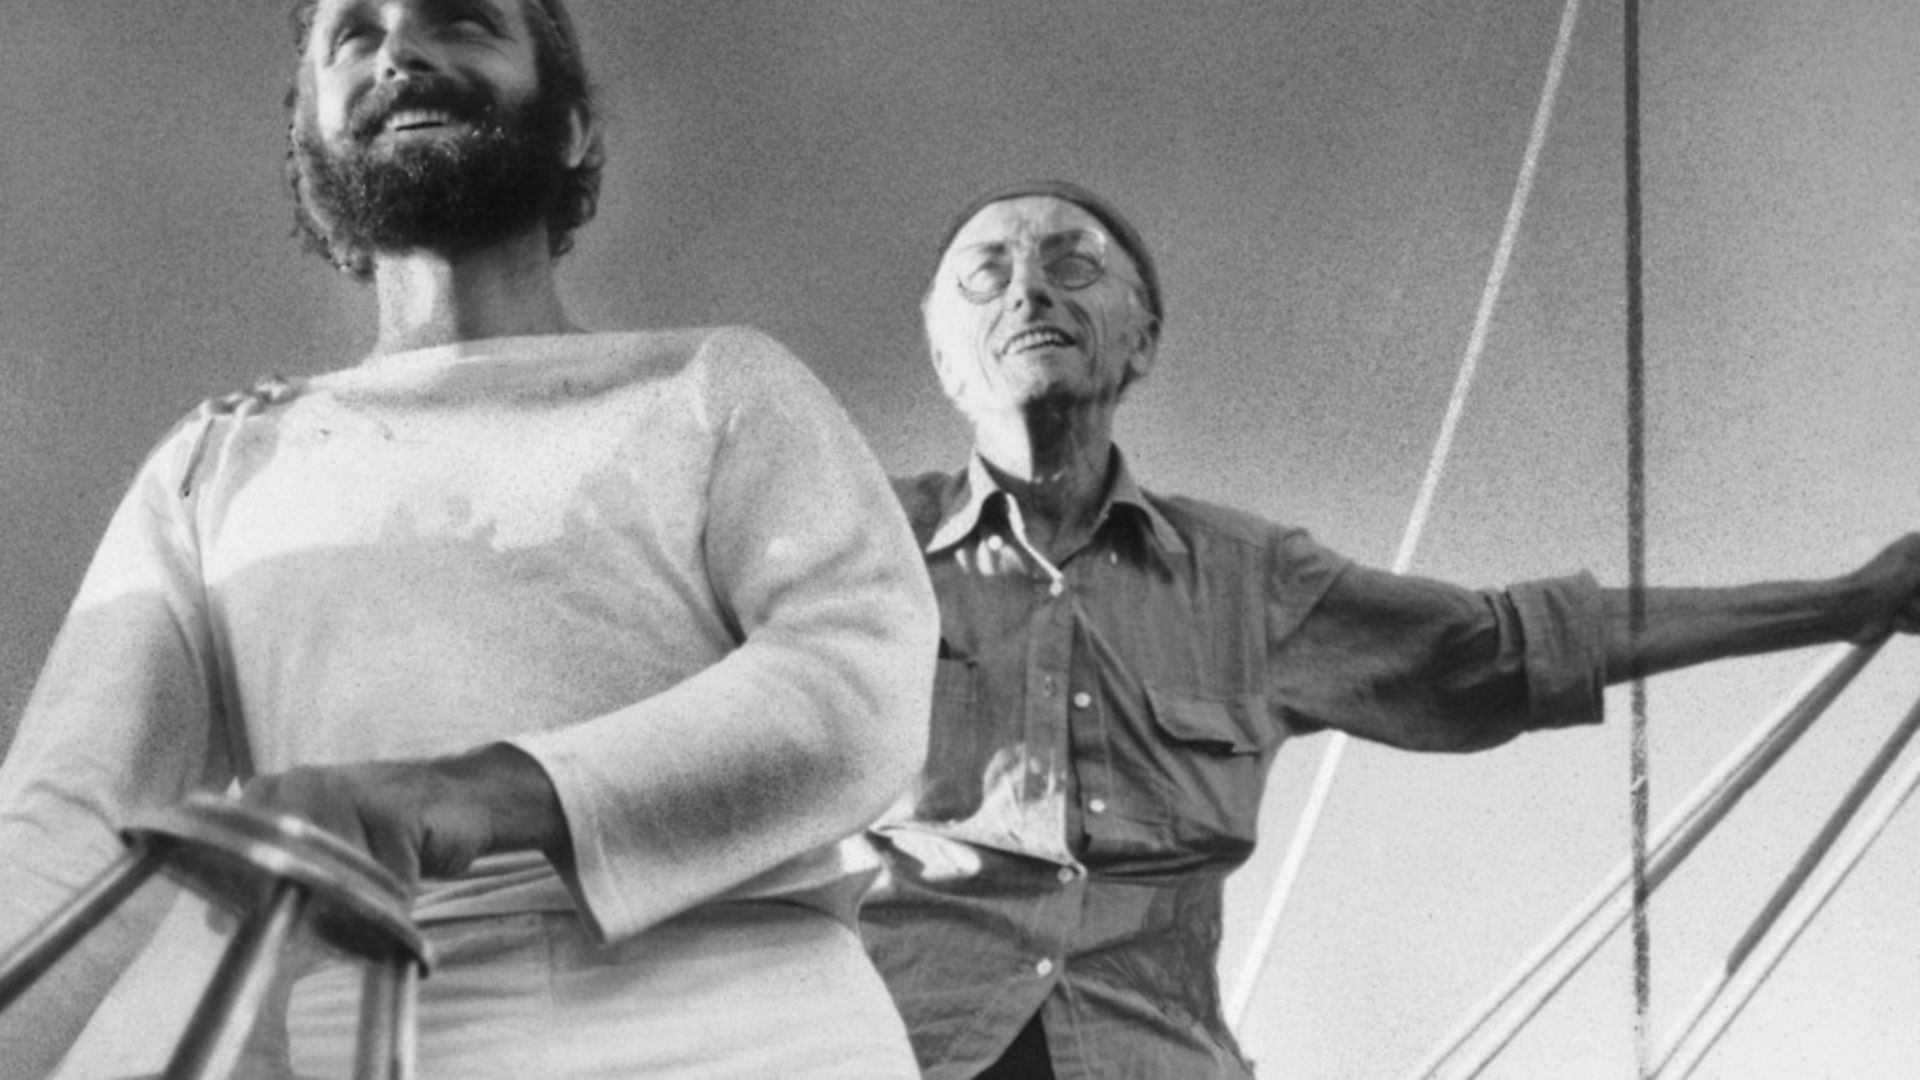 Jacques Cousteau, background, and his son, Phillipe, at the wheel of a ship. - Credit: Bettmann Archive